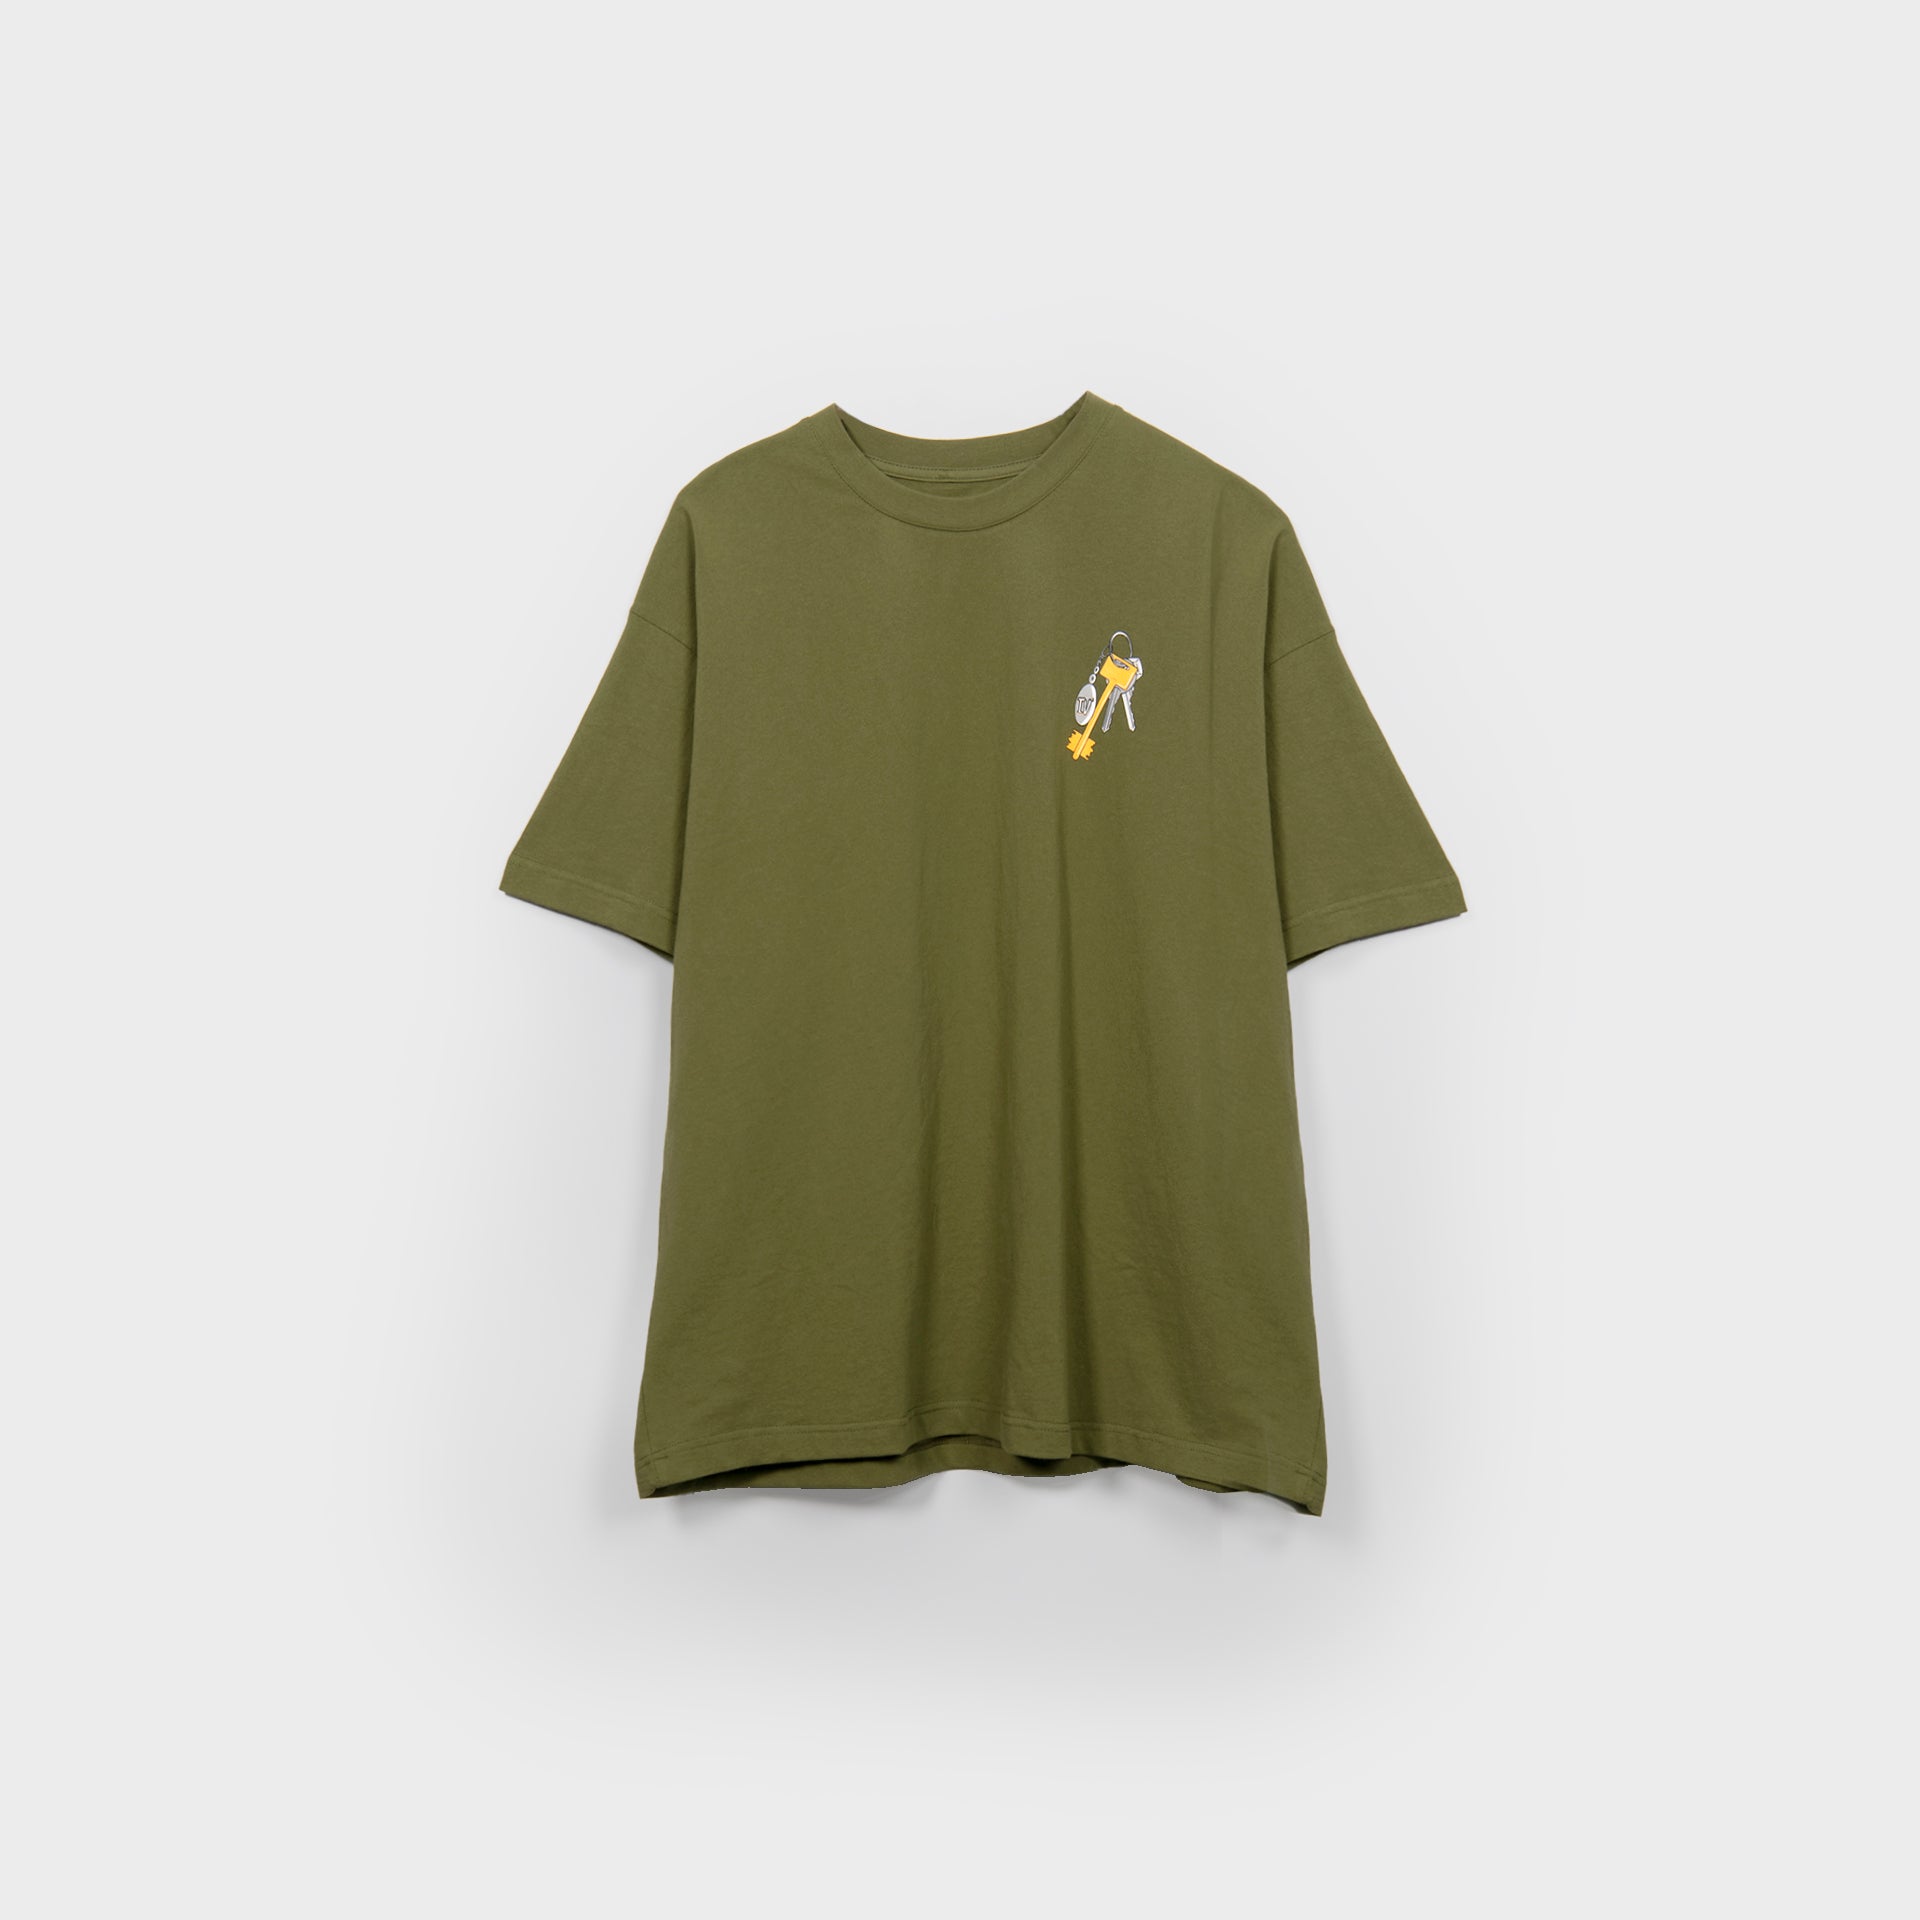 Green "Old Keys" T-shirt From Triple Four